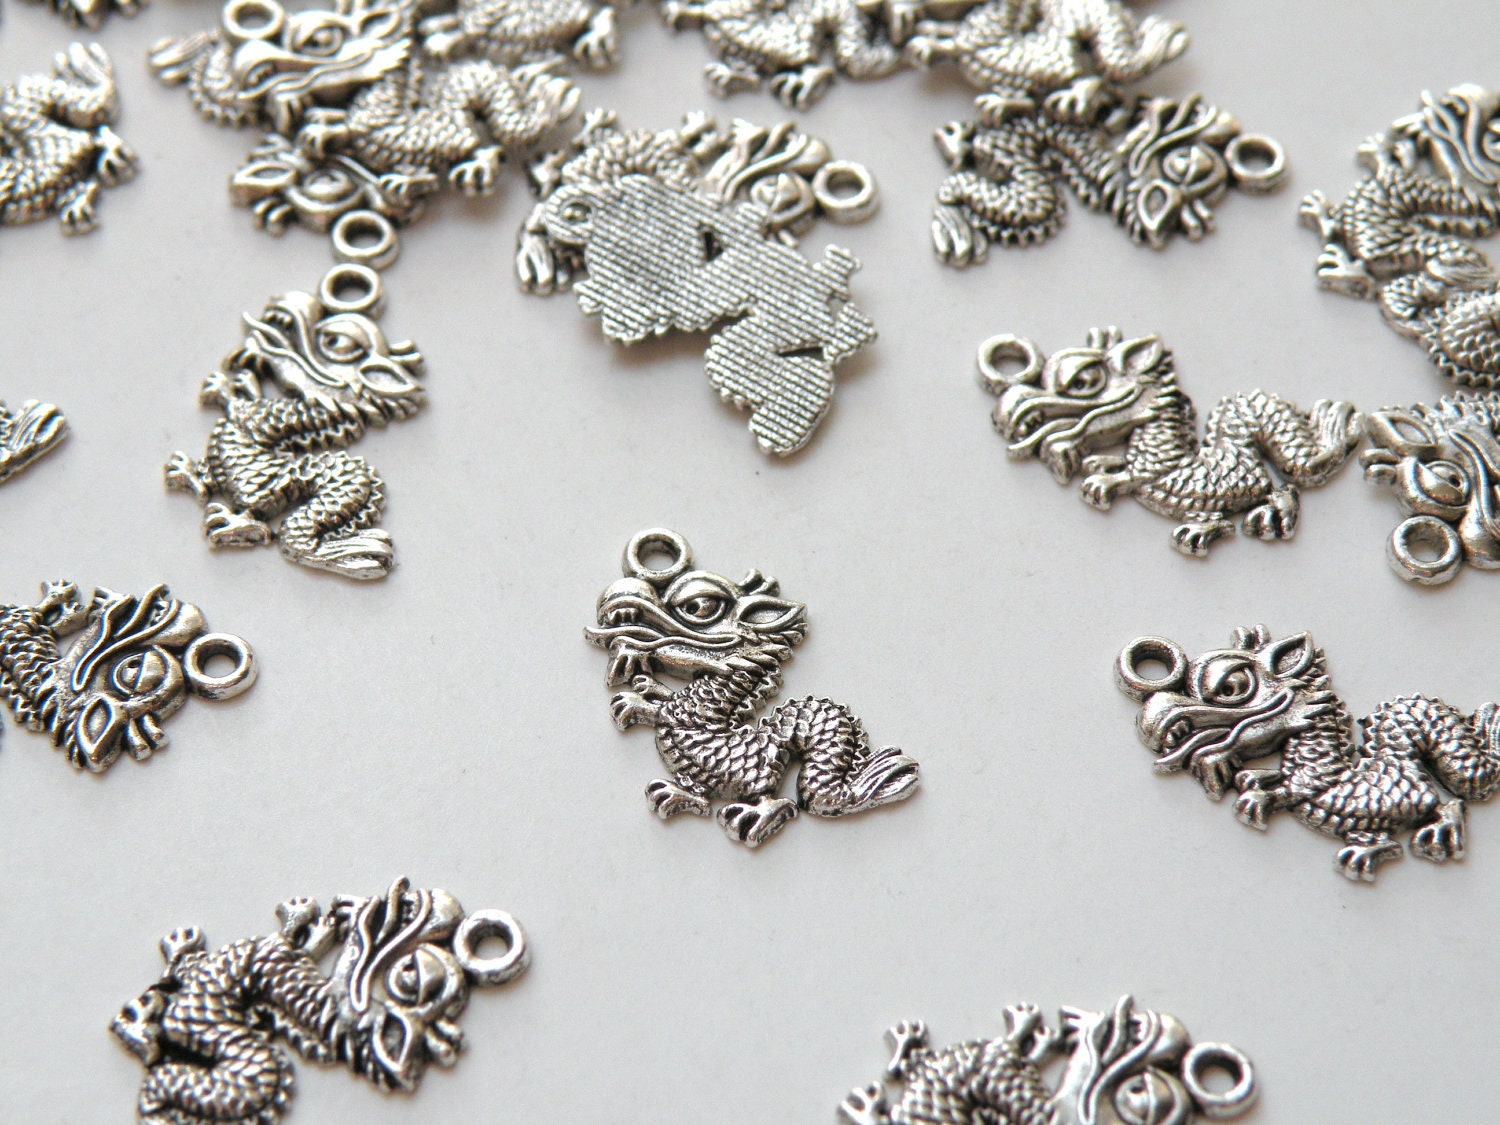 WYSIWYG 4pcs 45x38mm Dragon Charms For Jewelry Making Jewelry Accessories  Antique Silver Plated Antique Bronze Plated